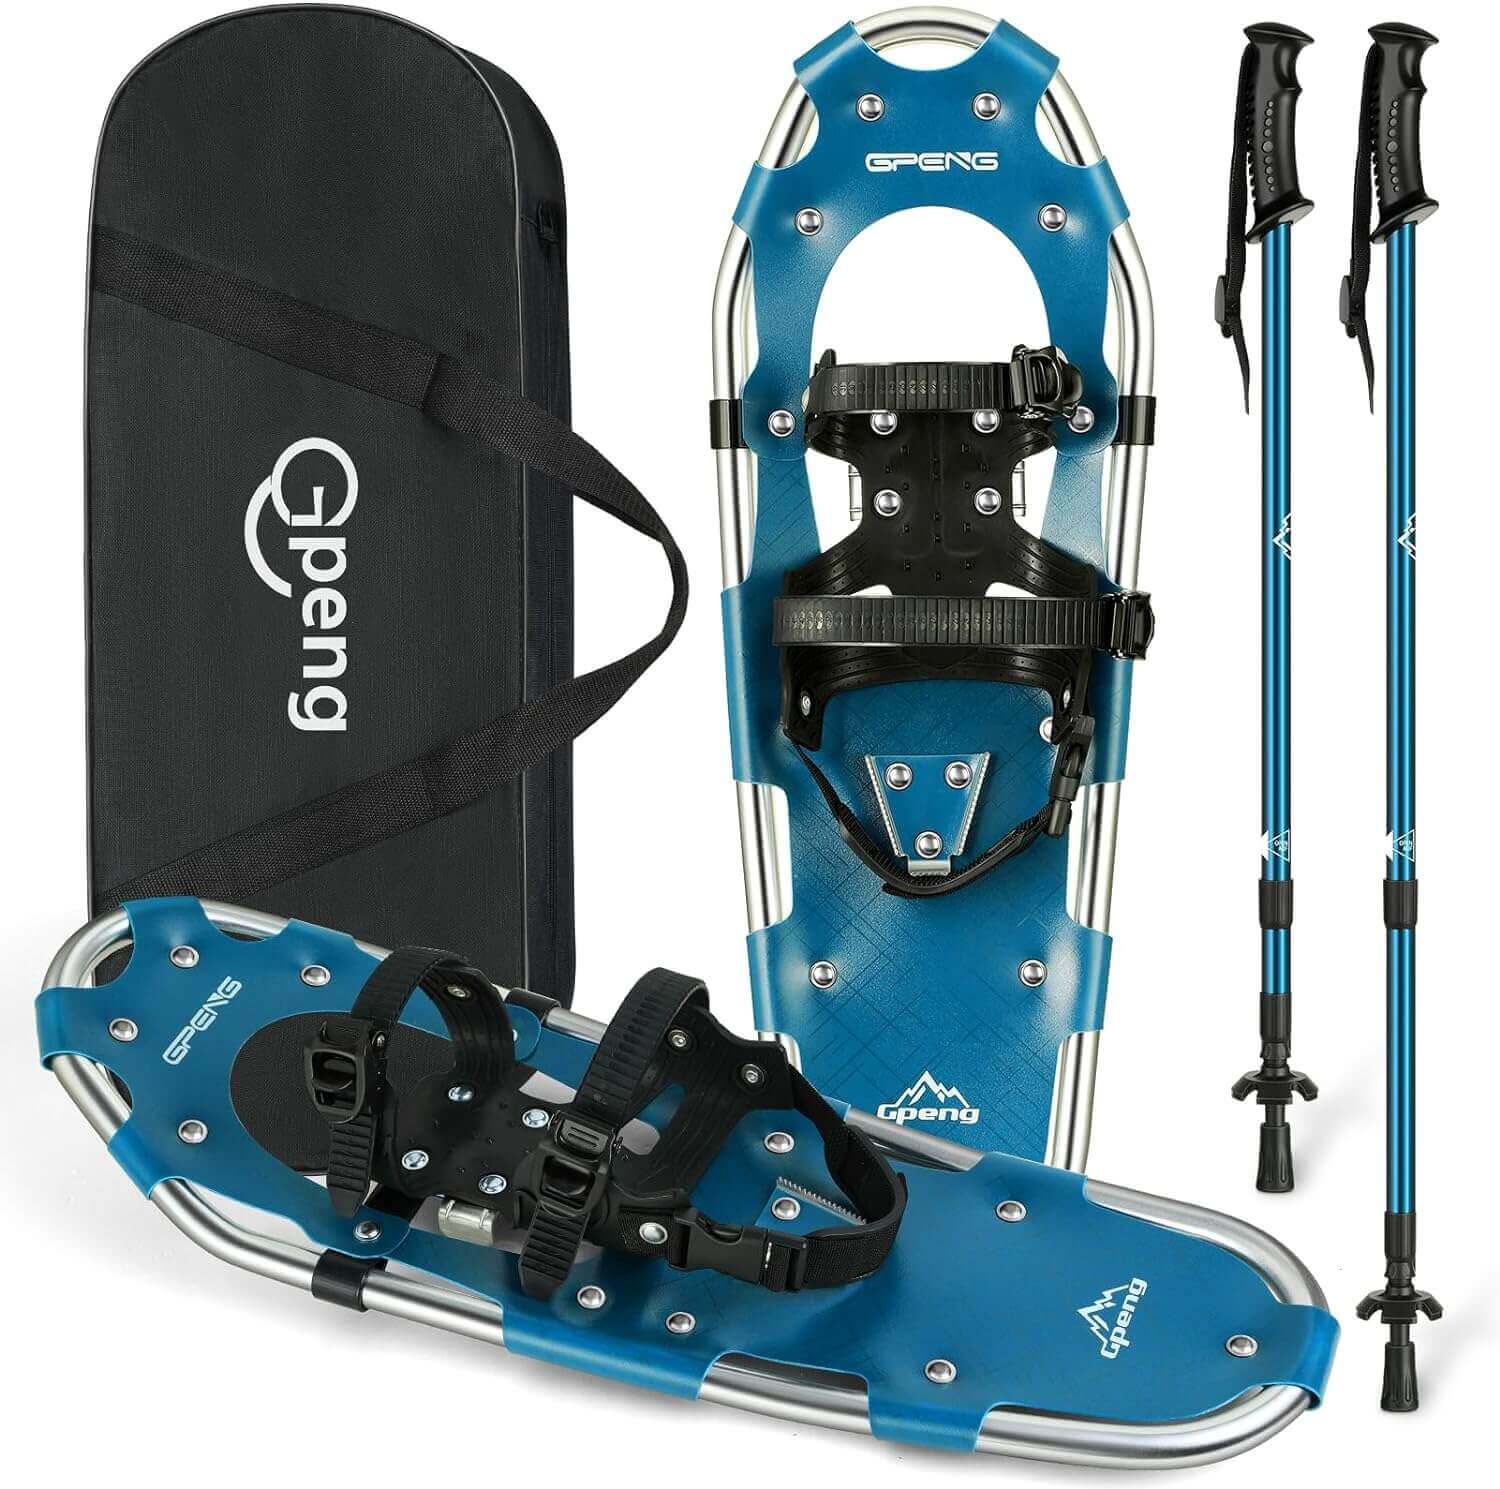 Shop The Latest >3-in-1 Xtreme Lightweight Terrain Snowshoes with Trekking Poles > *Only $134.95*> From The Top Brand > *‎Gpengl* > Shop Now and Get Free Shipping On Orders Over $45.00 >*Shop Earth Foot*